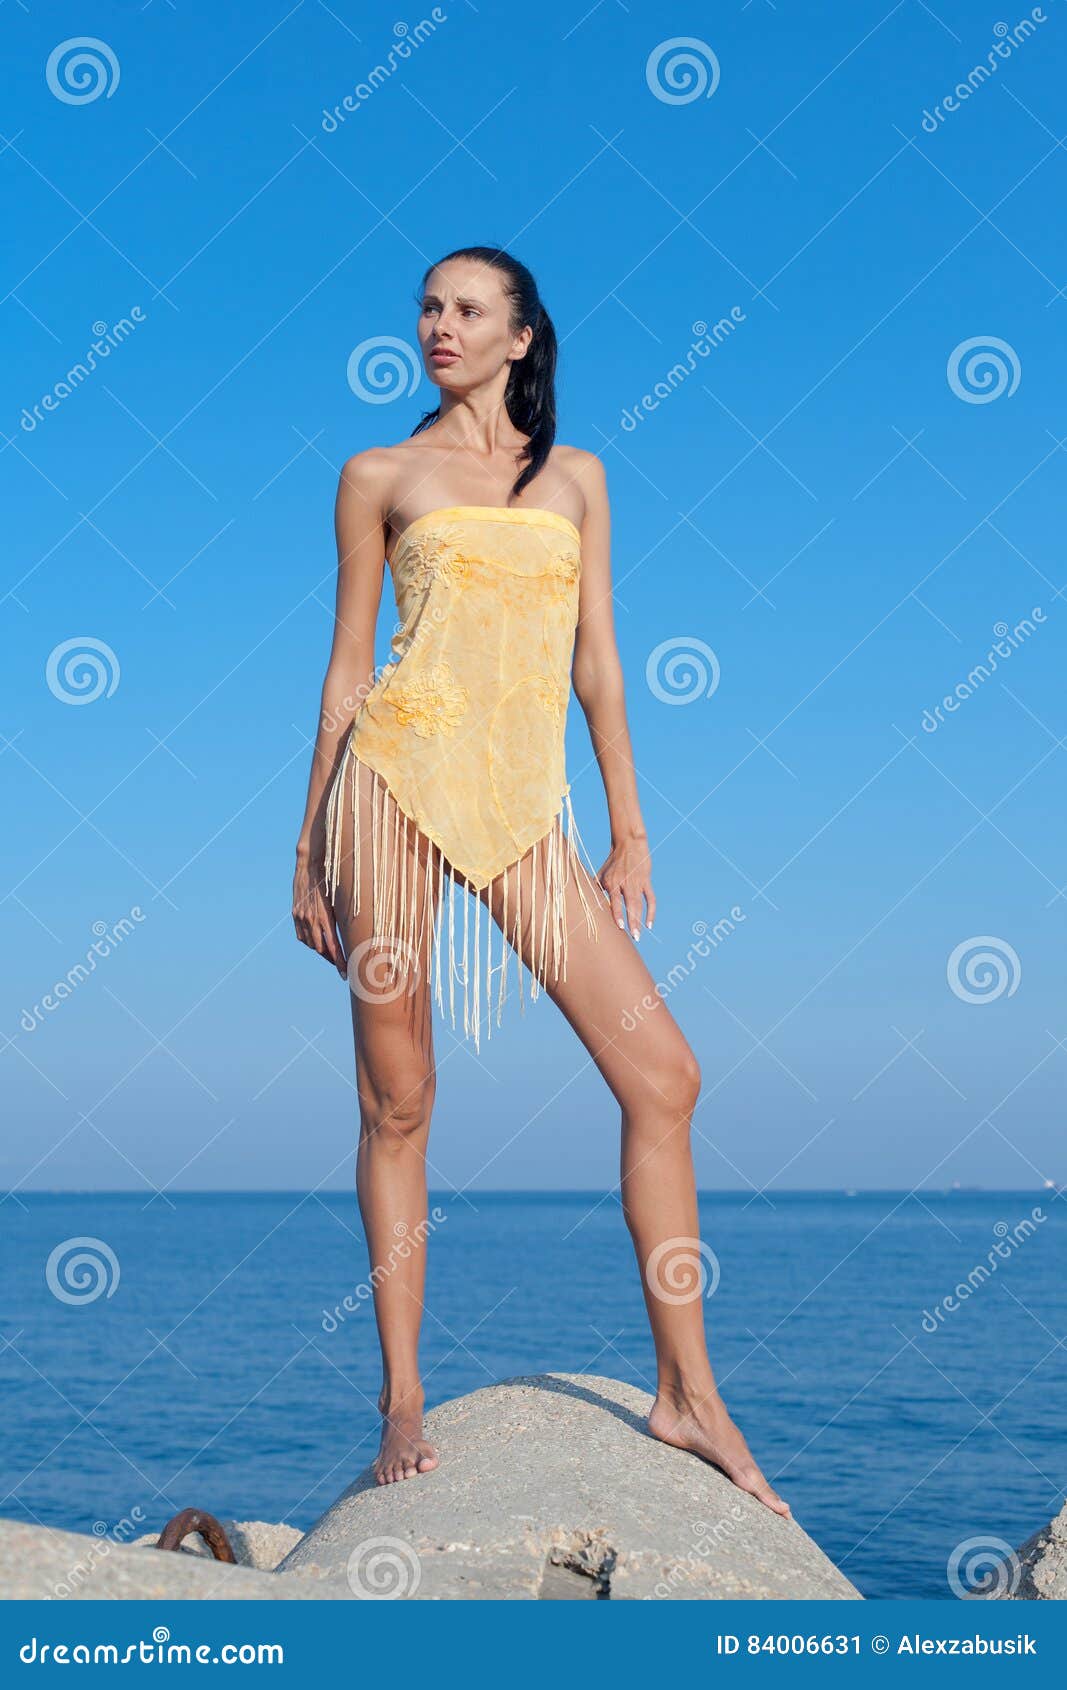 dark haired young woman in pareo with fringes poses outdoors